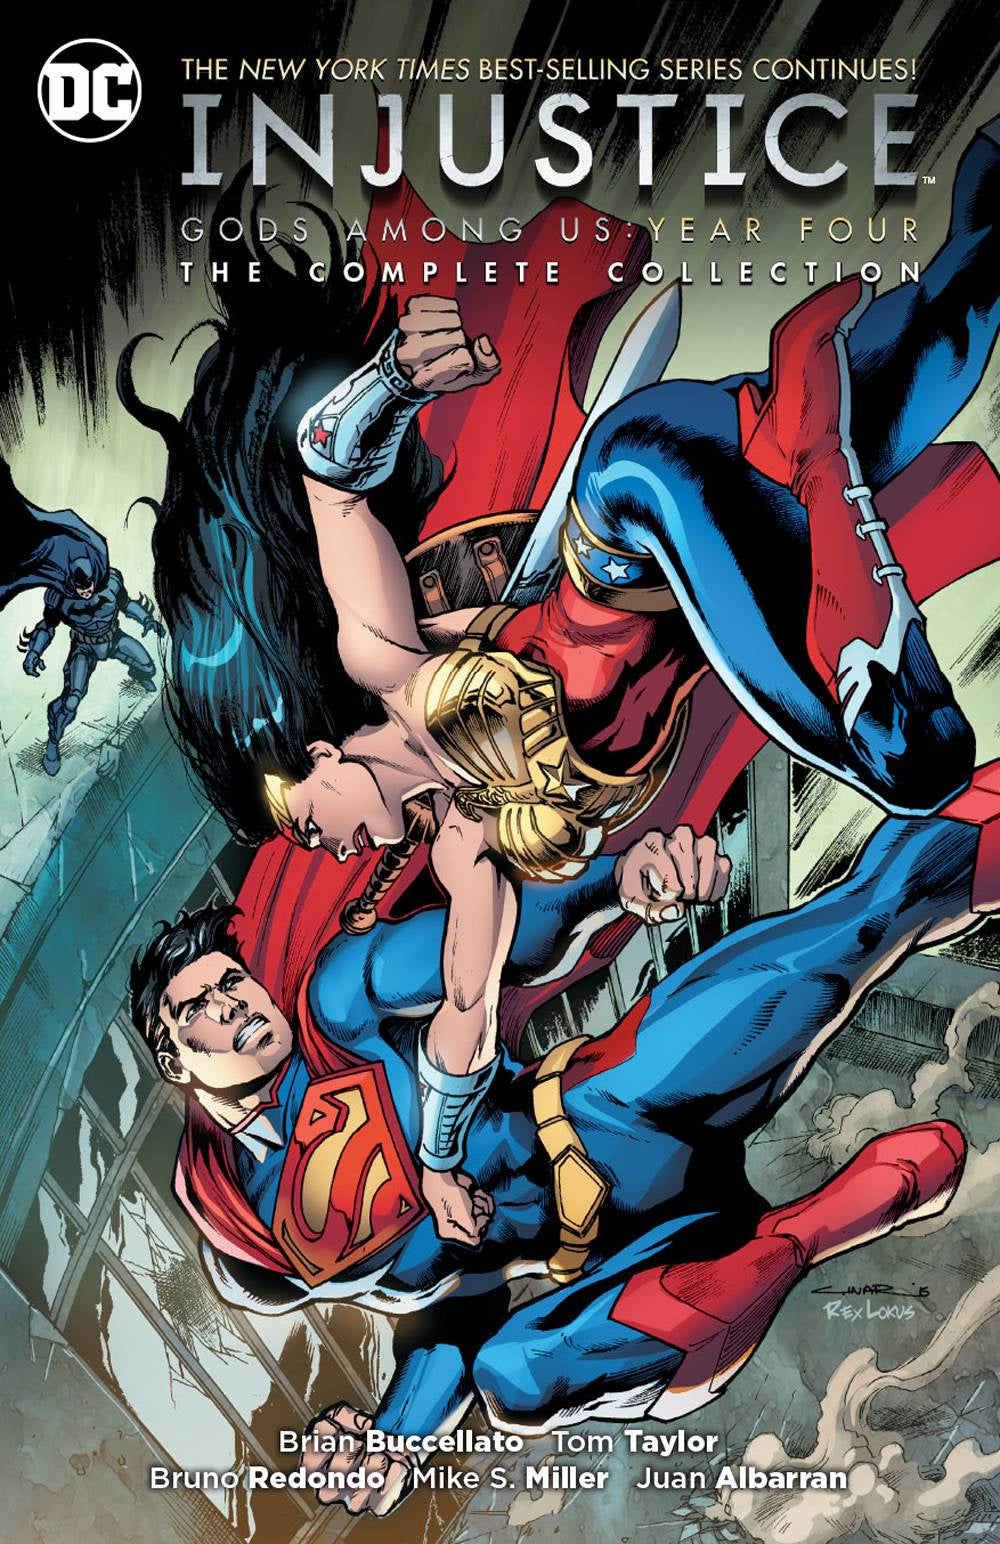 INJUSTICE GODS AMONG US YEAR FOUR COMPLETE COLLECTION